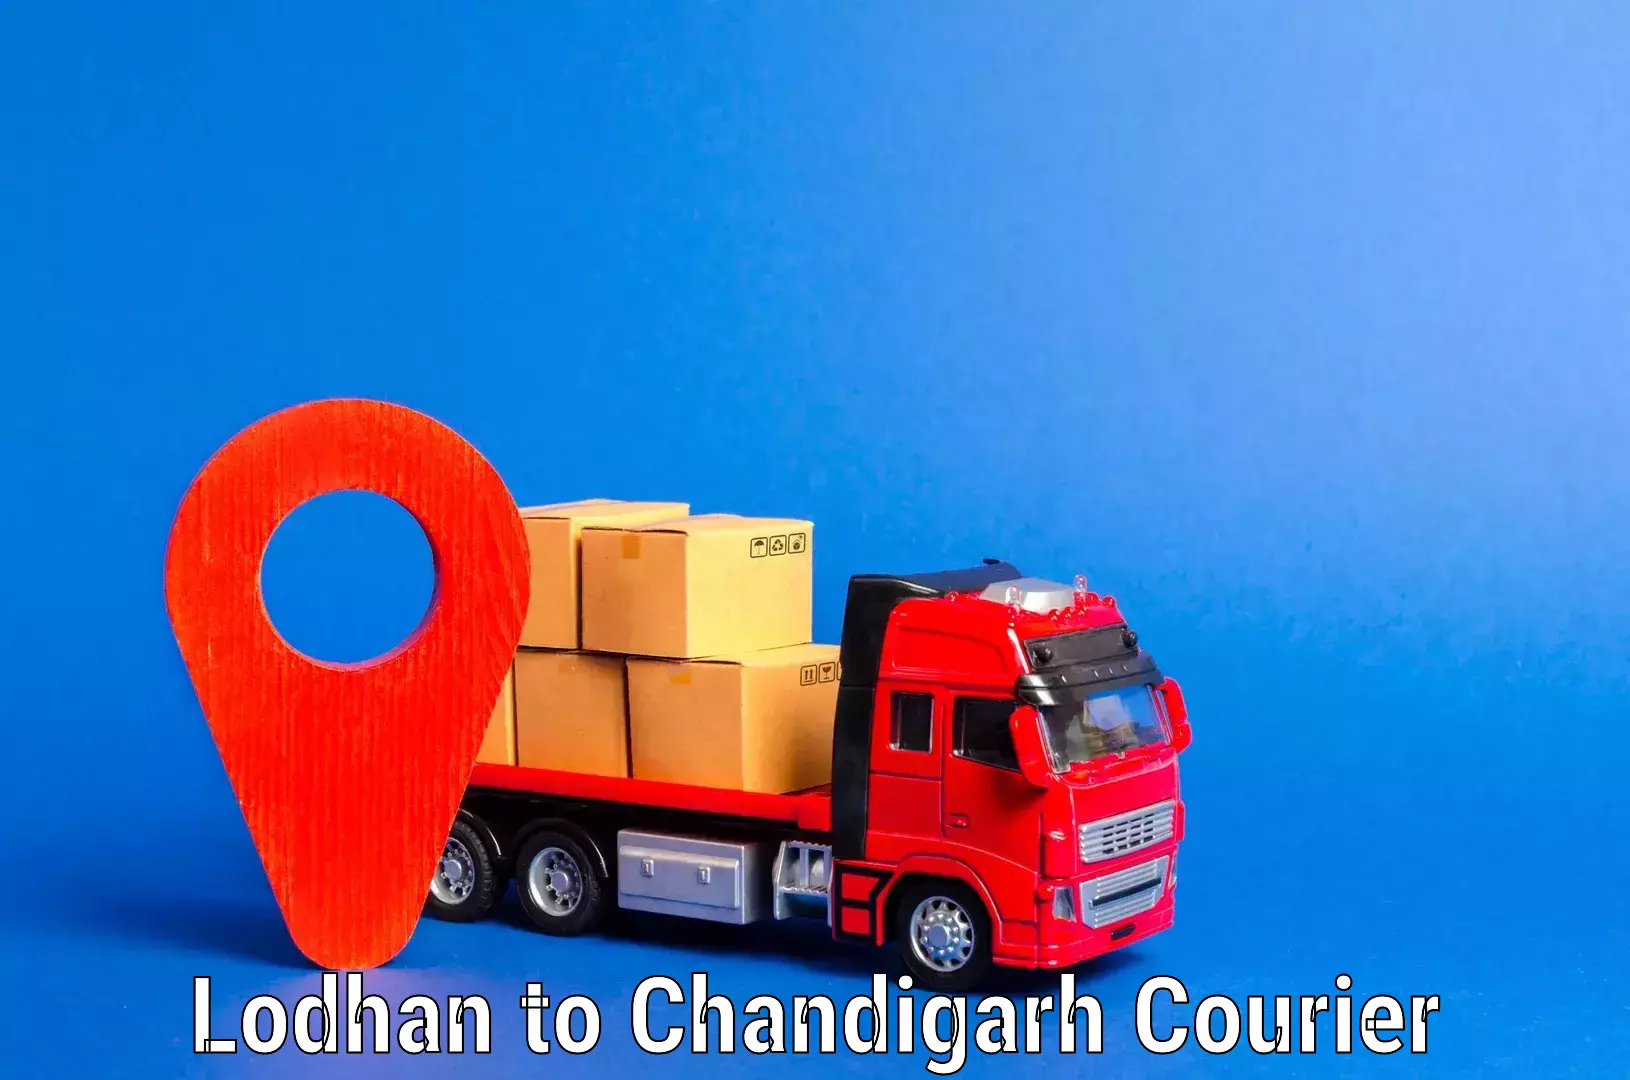 Professional relocation services Lodhan to Chandigarh